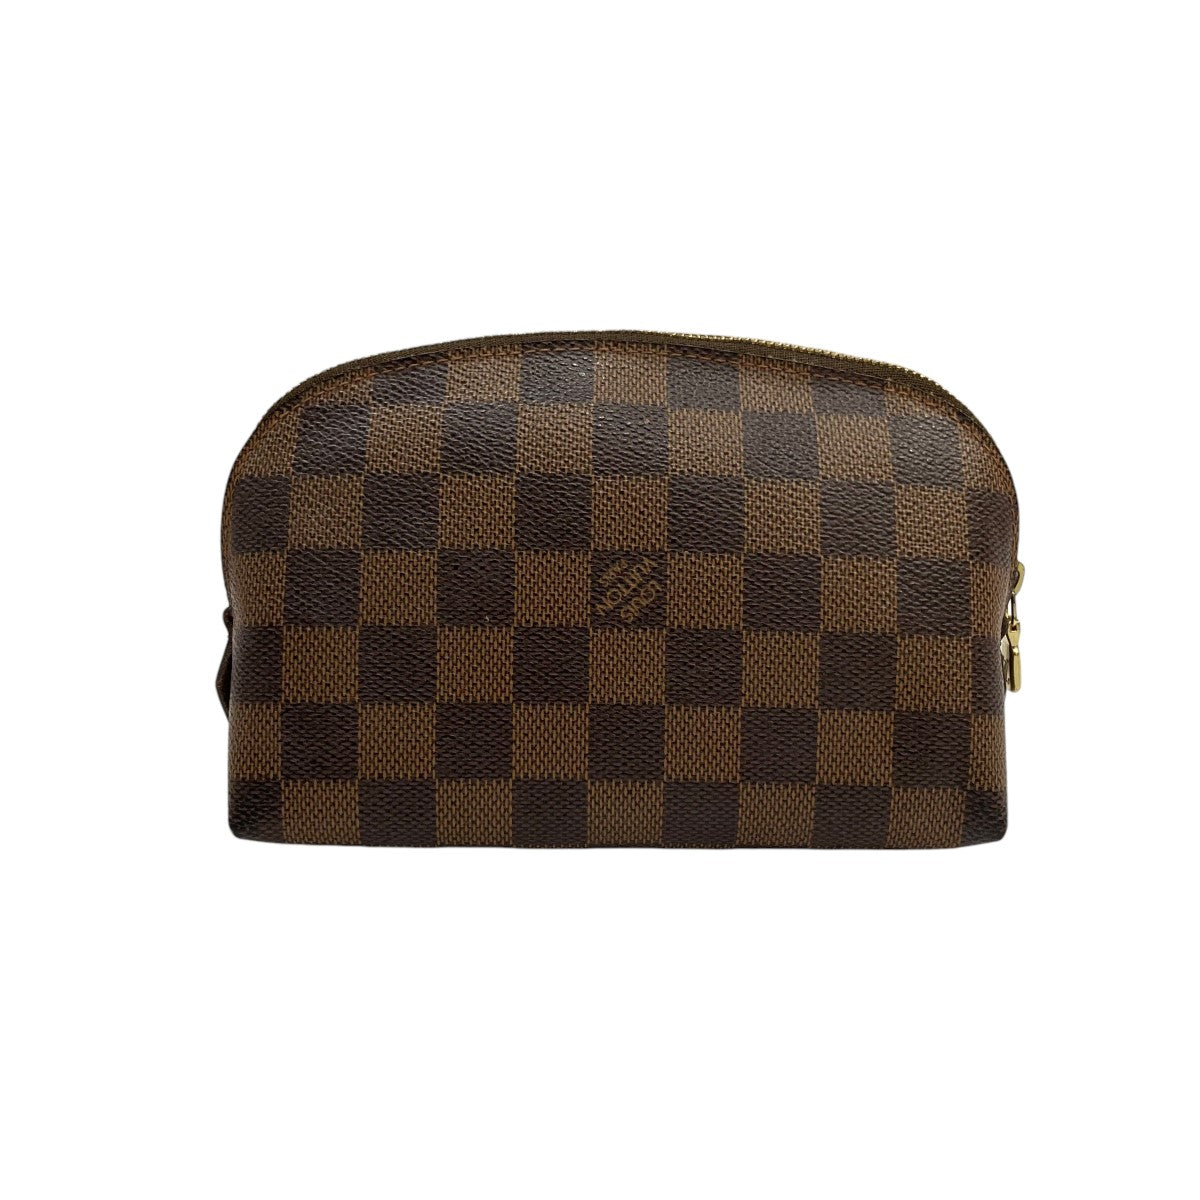 LOUIS VUITTON(ルイヴィトン) ダミエ ポーチ N47516 CA2170 N47516